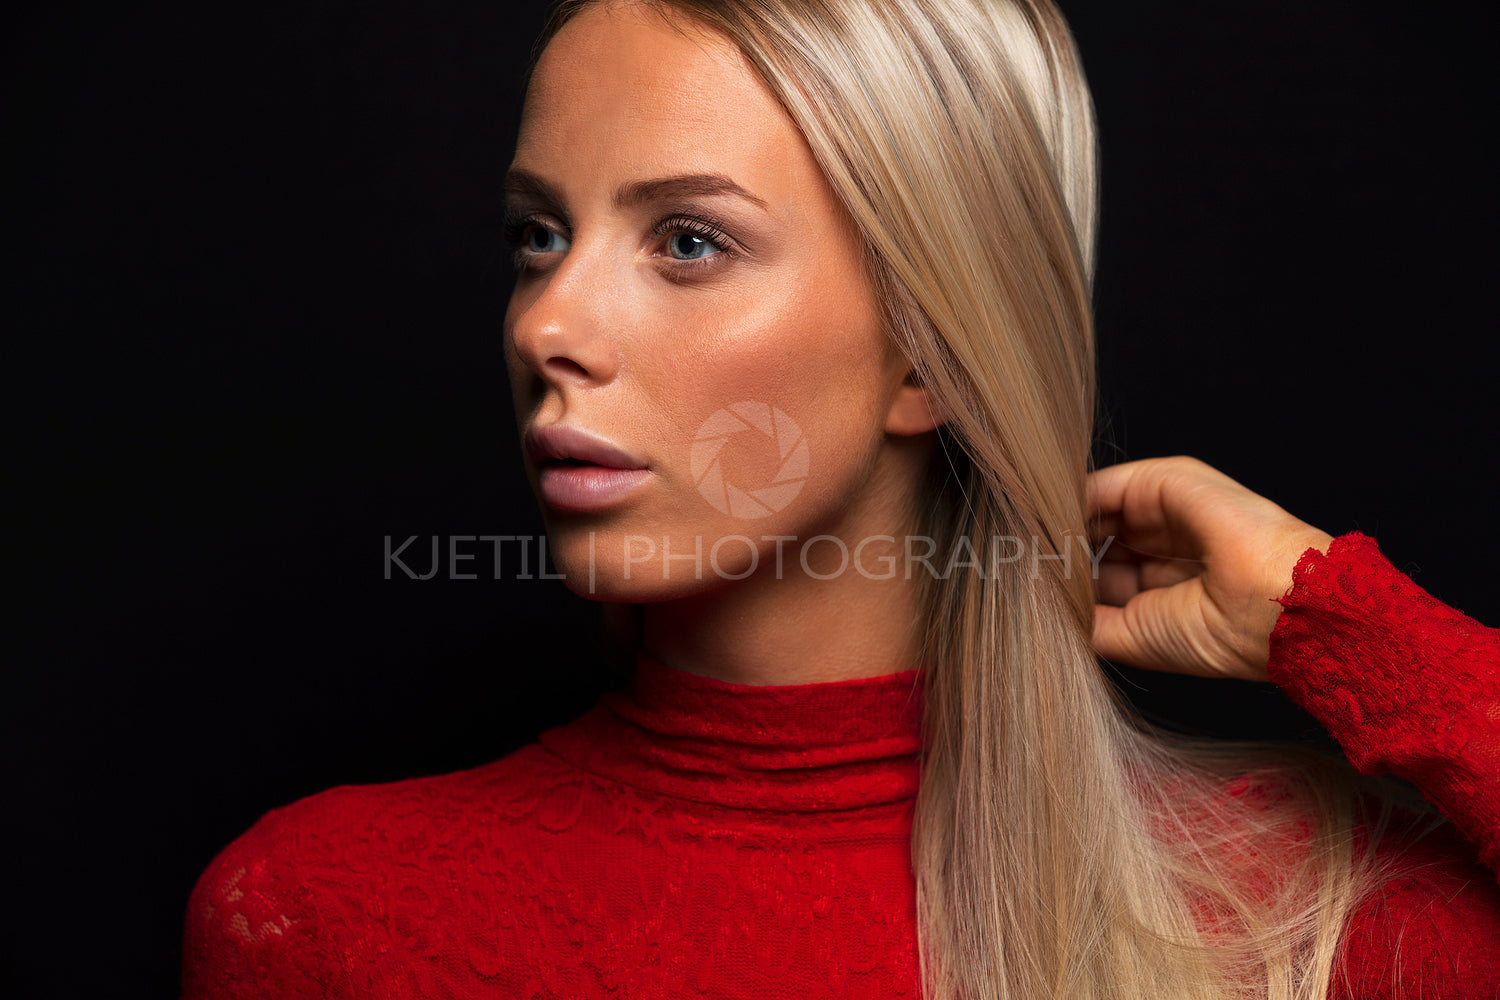 Dark portrait of a beautiful blonde woman in red dress with black bakground